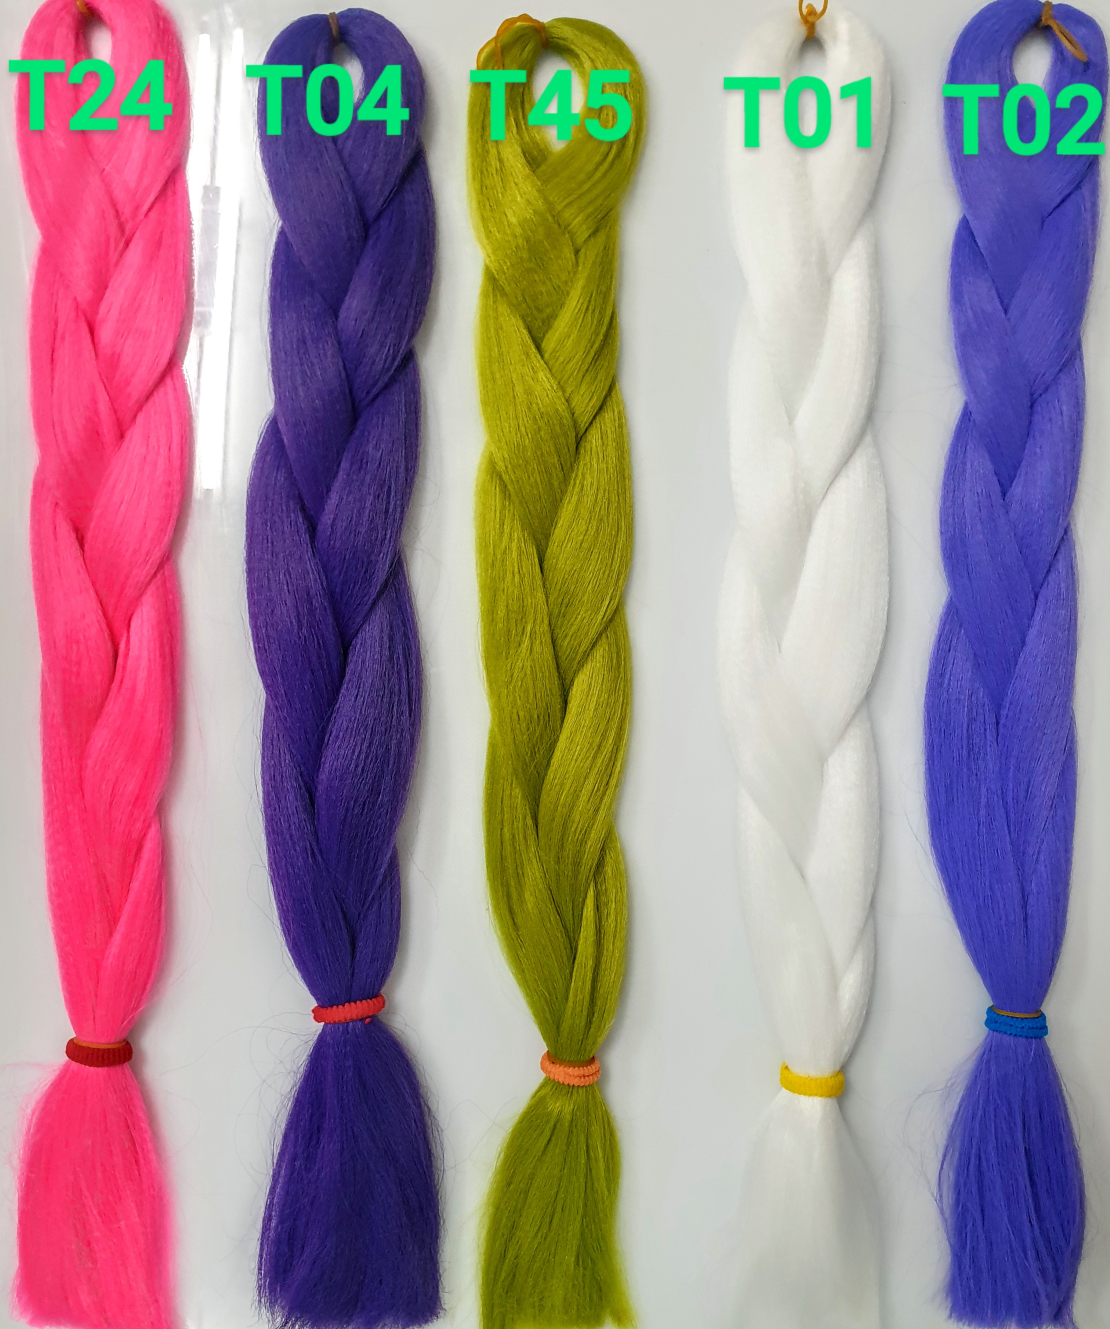 Synthetic hair braids